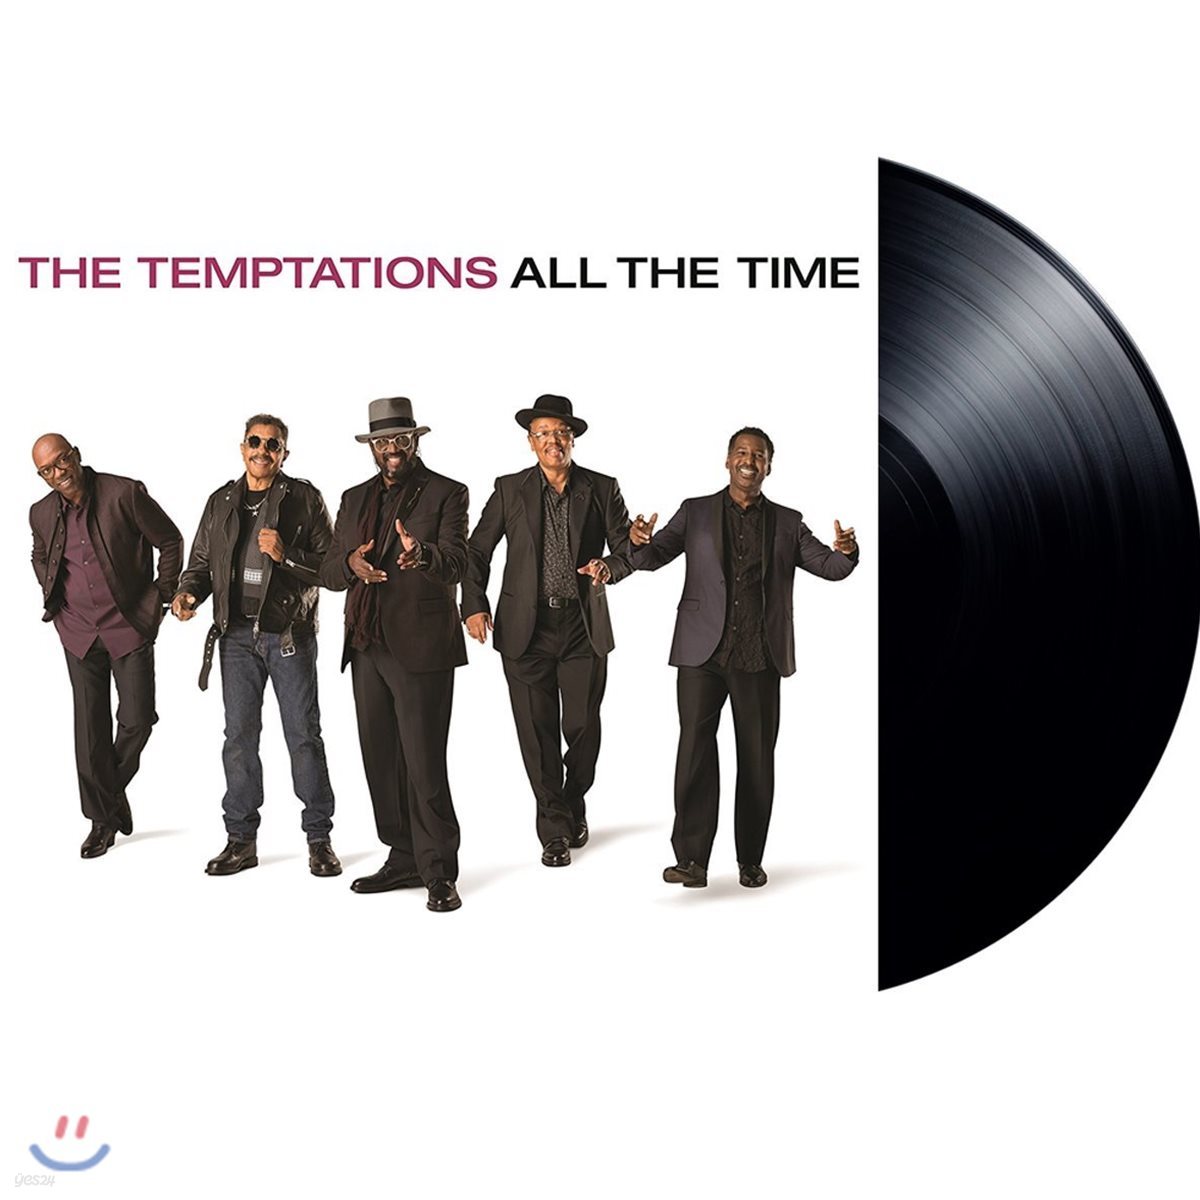 The Temptations - All the Time [LP]